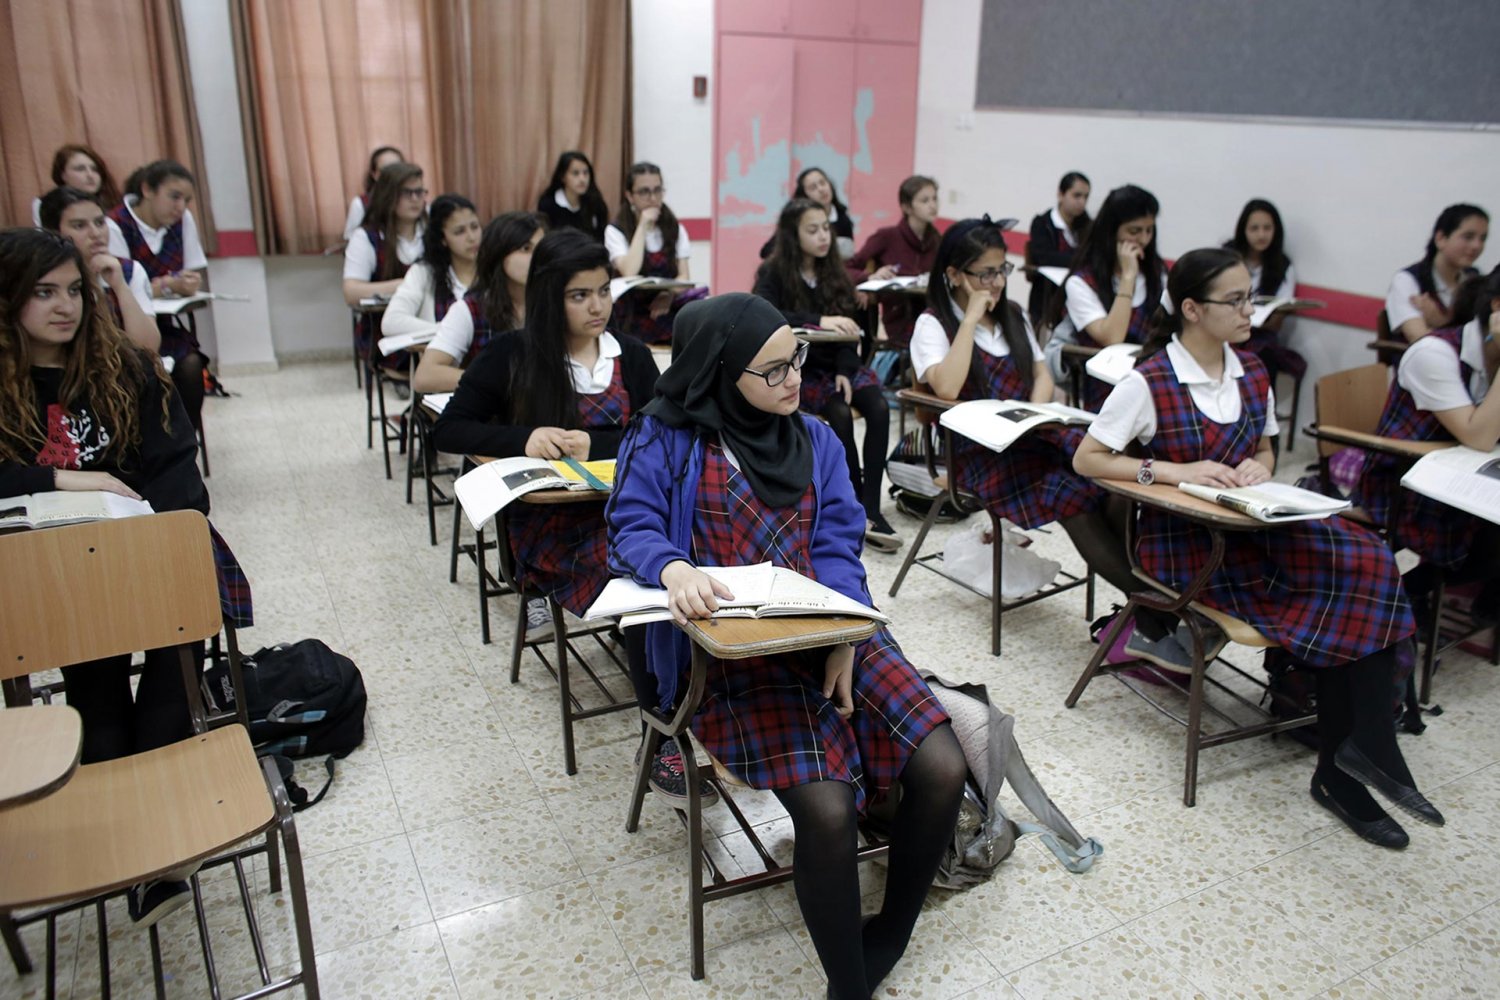 Classroom of Palestinian students in uniforms at Rosary Sisters School in Beit Hanina